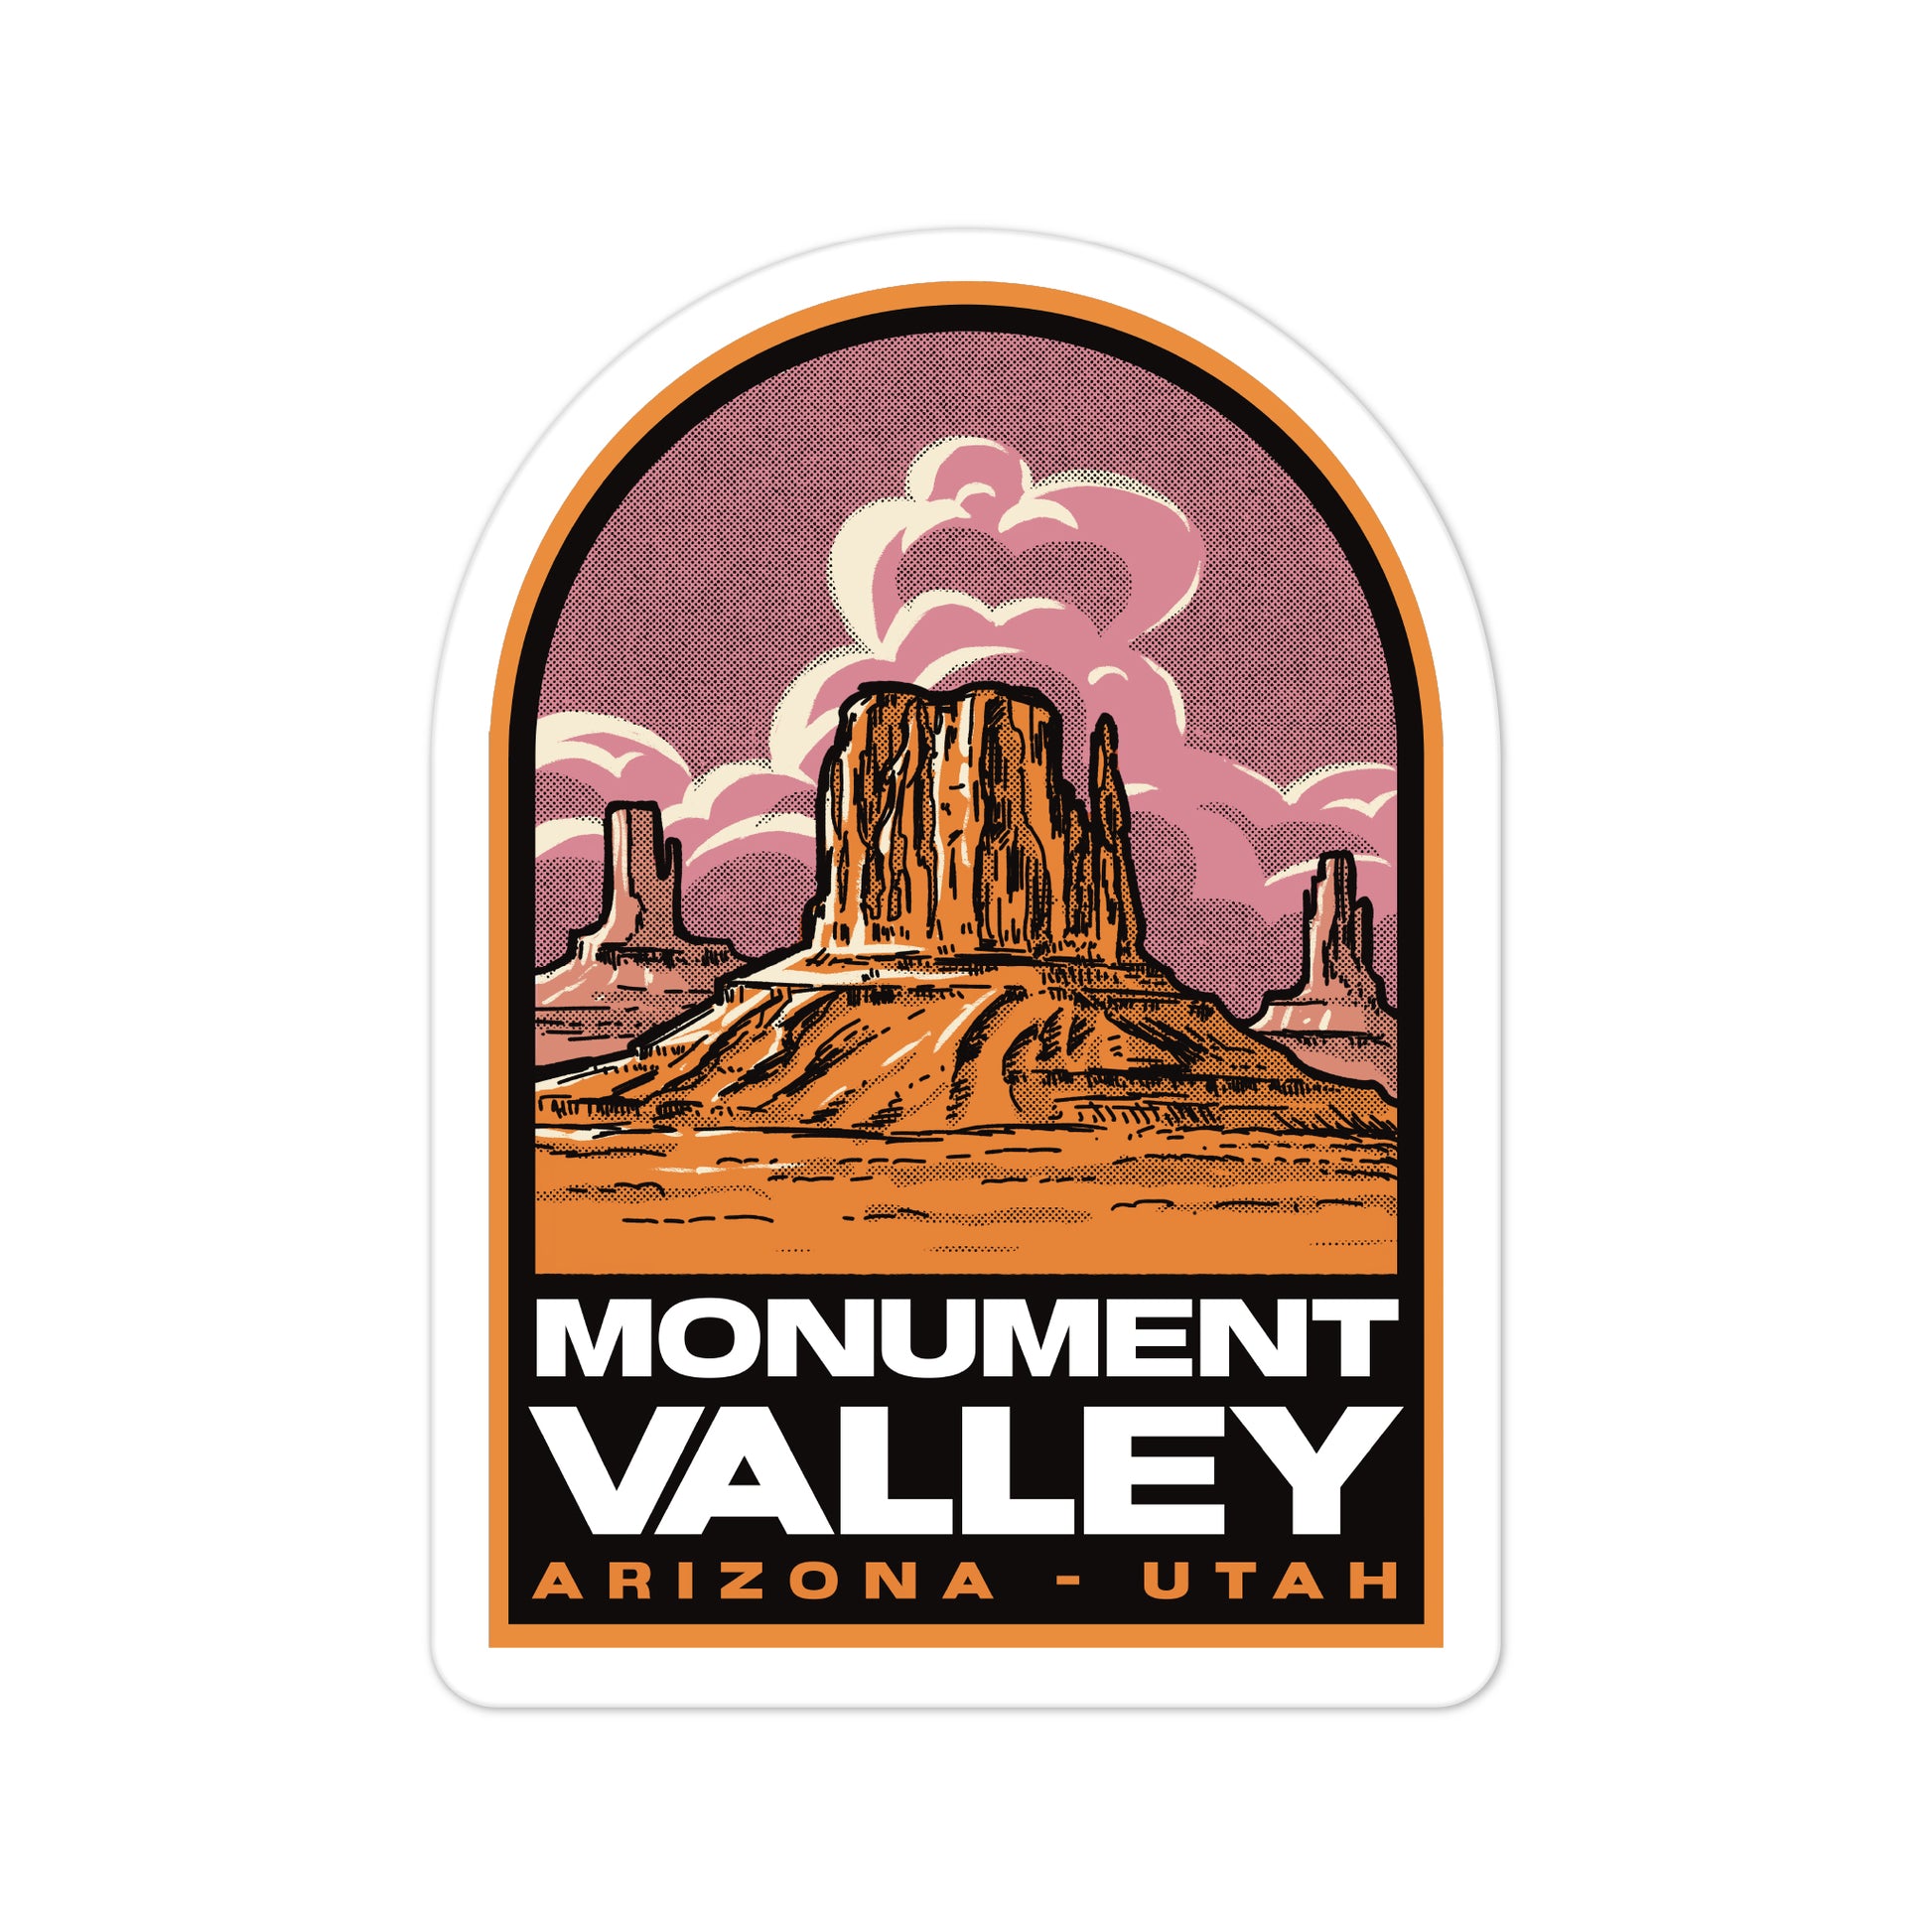 A sticker of Monument Valley